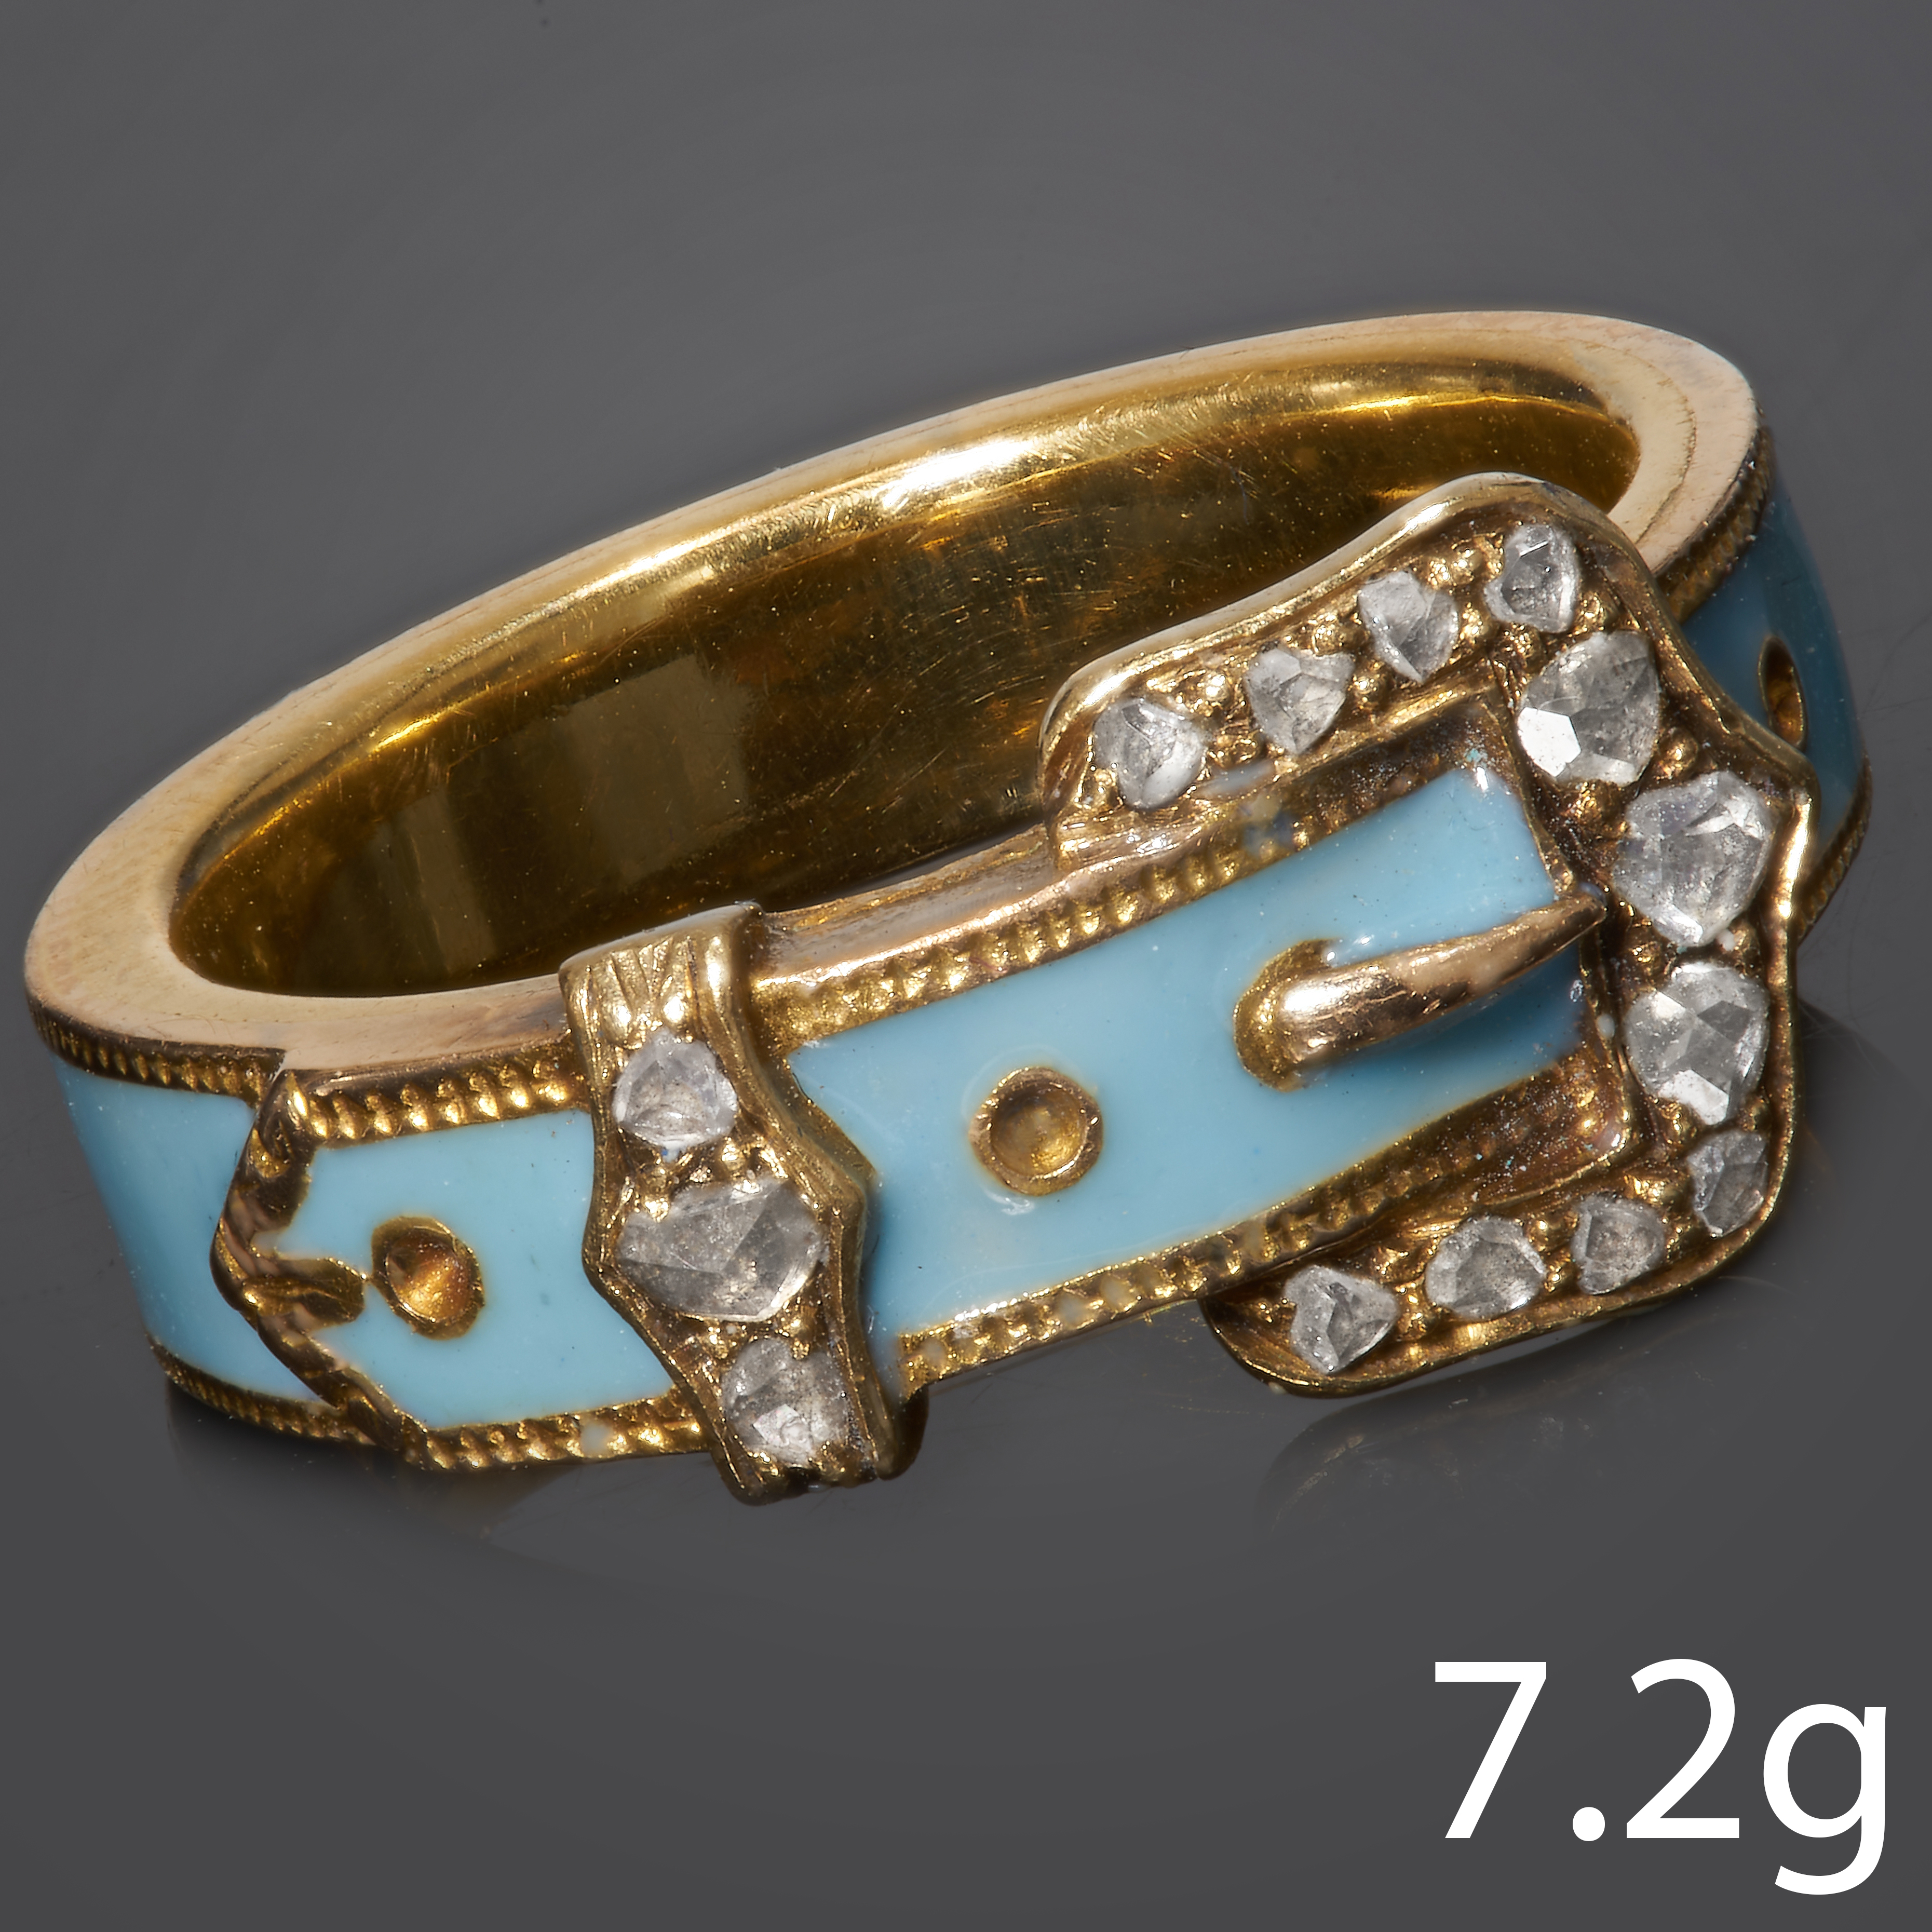 ANTIQUE ENAMEL AND DIAMOND BUCKLE RING